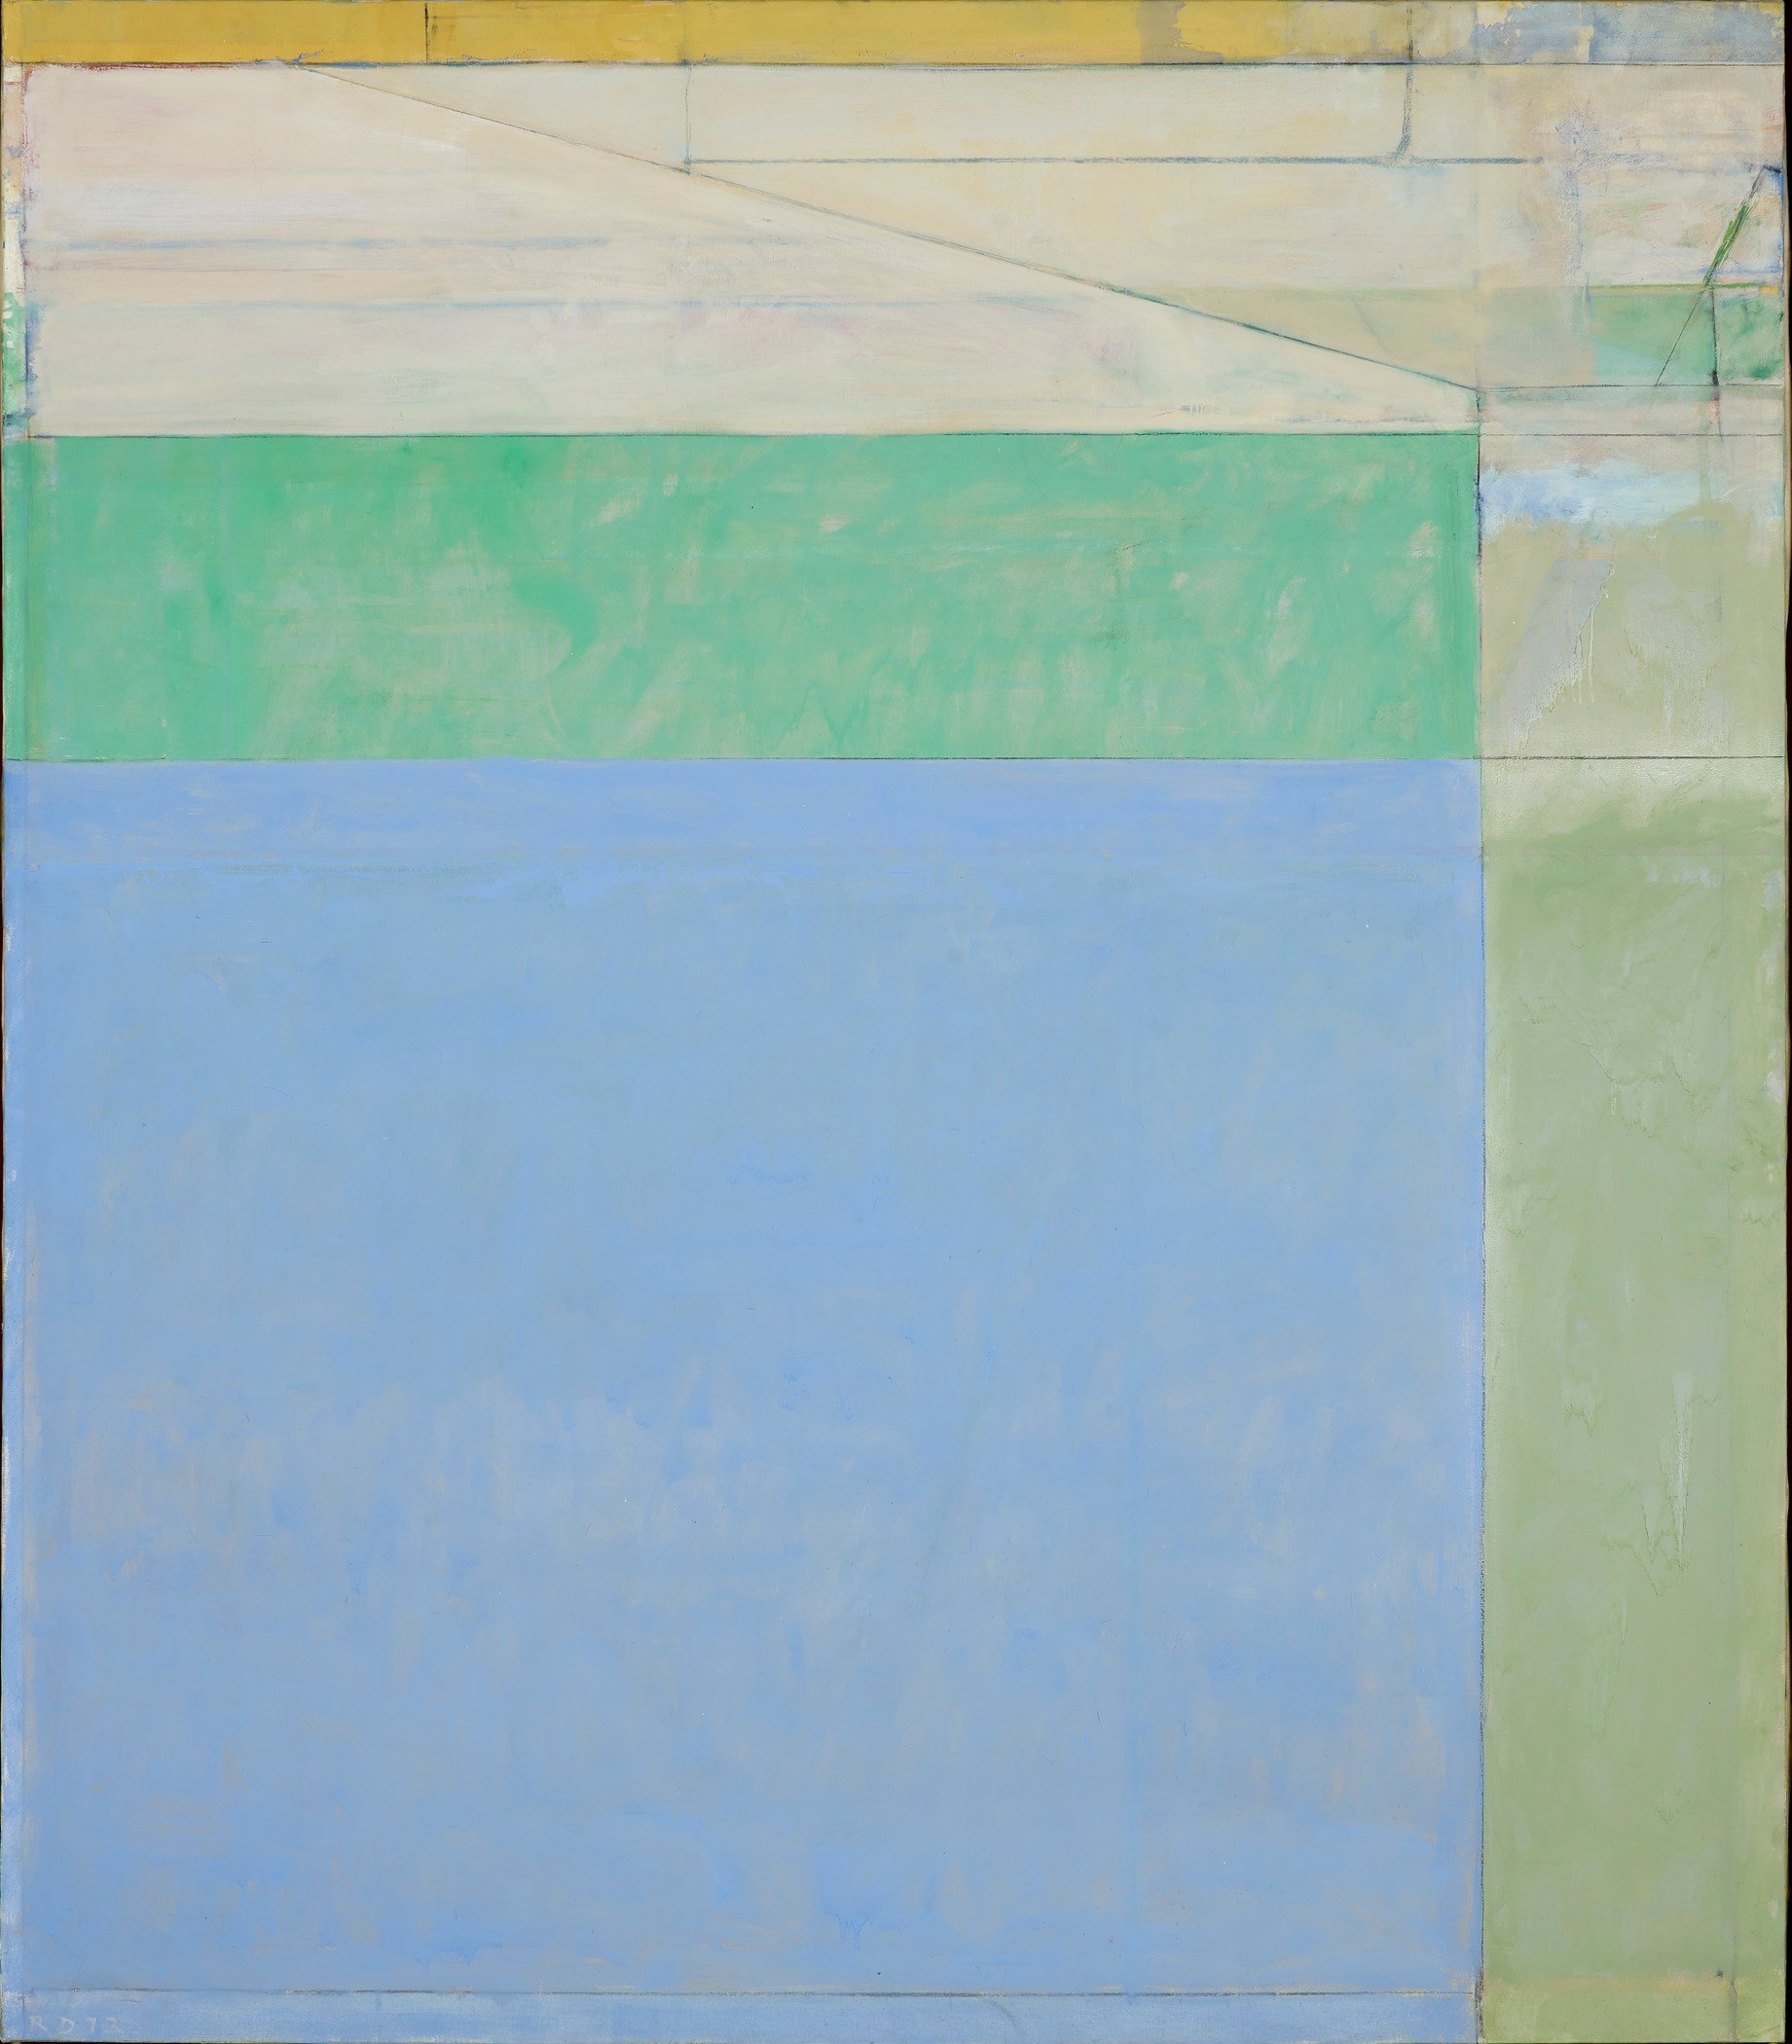 "Ocean Park No. 66" by Richard Diebenkorn, 1973, an abstract painting with an 'L' or rectangular composition of blue, green, and muted yellow color fields, evoking architectural solidity and serene balance.